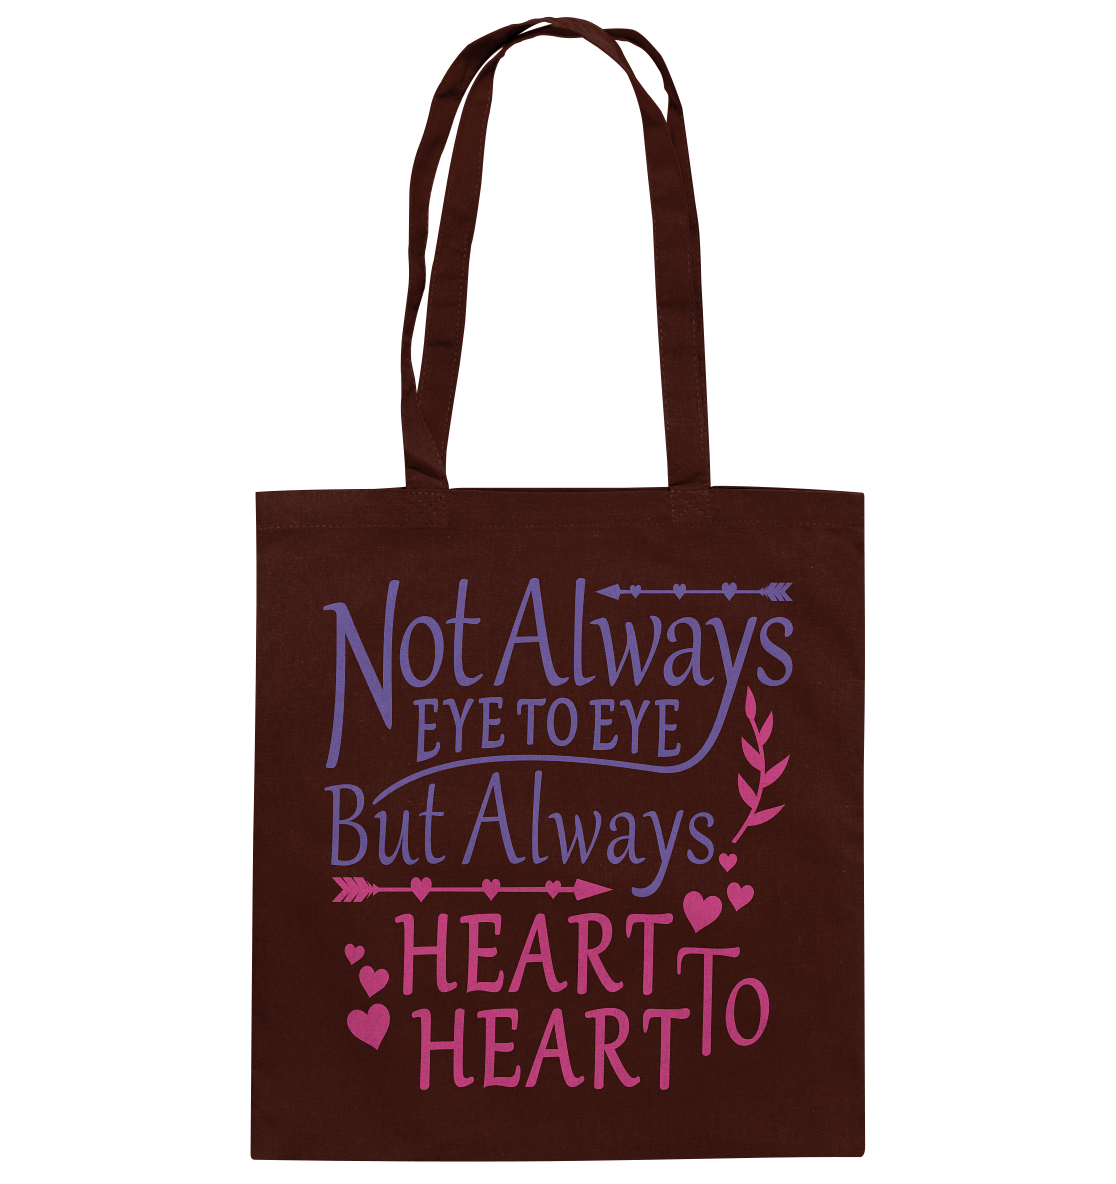 Not always eye to eye but always heart to heart - cotton bag